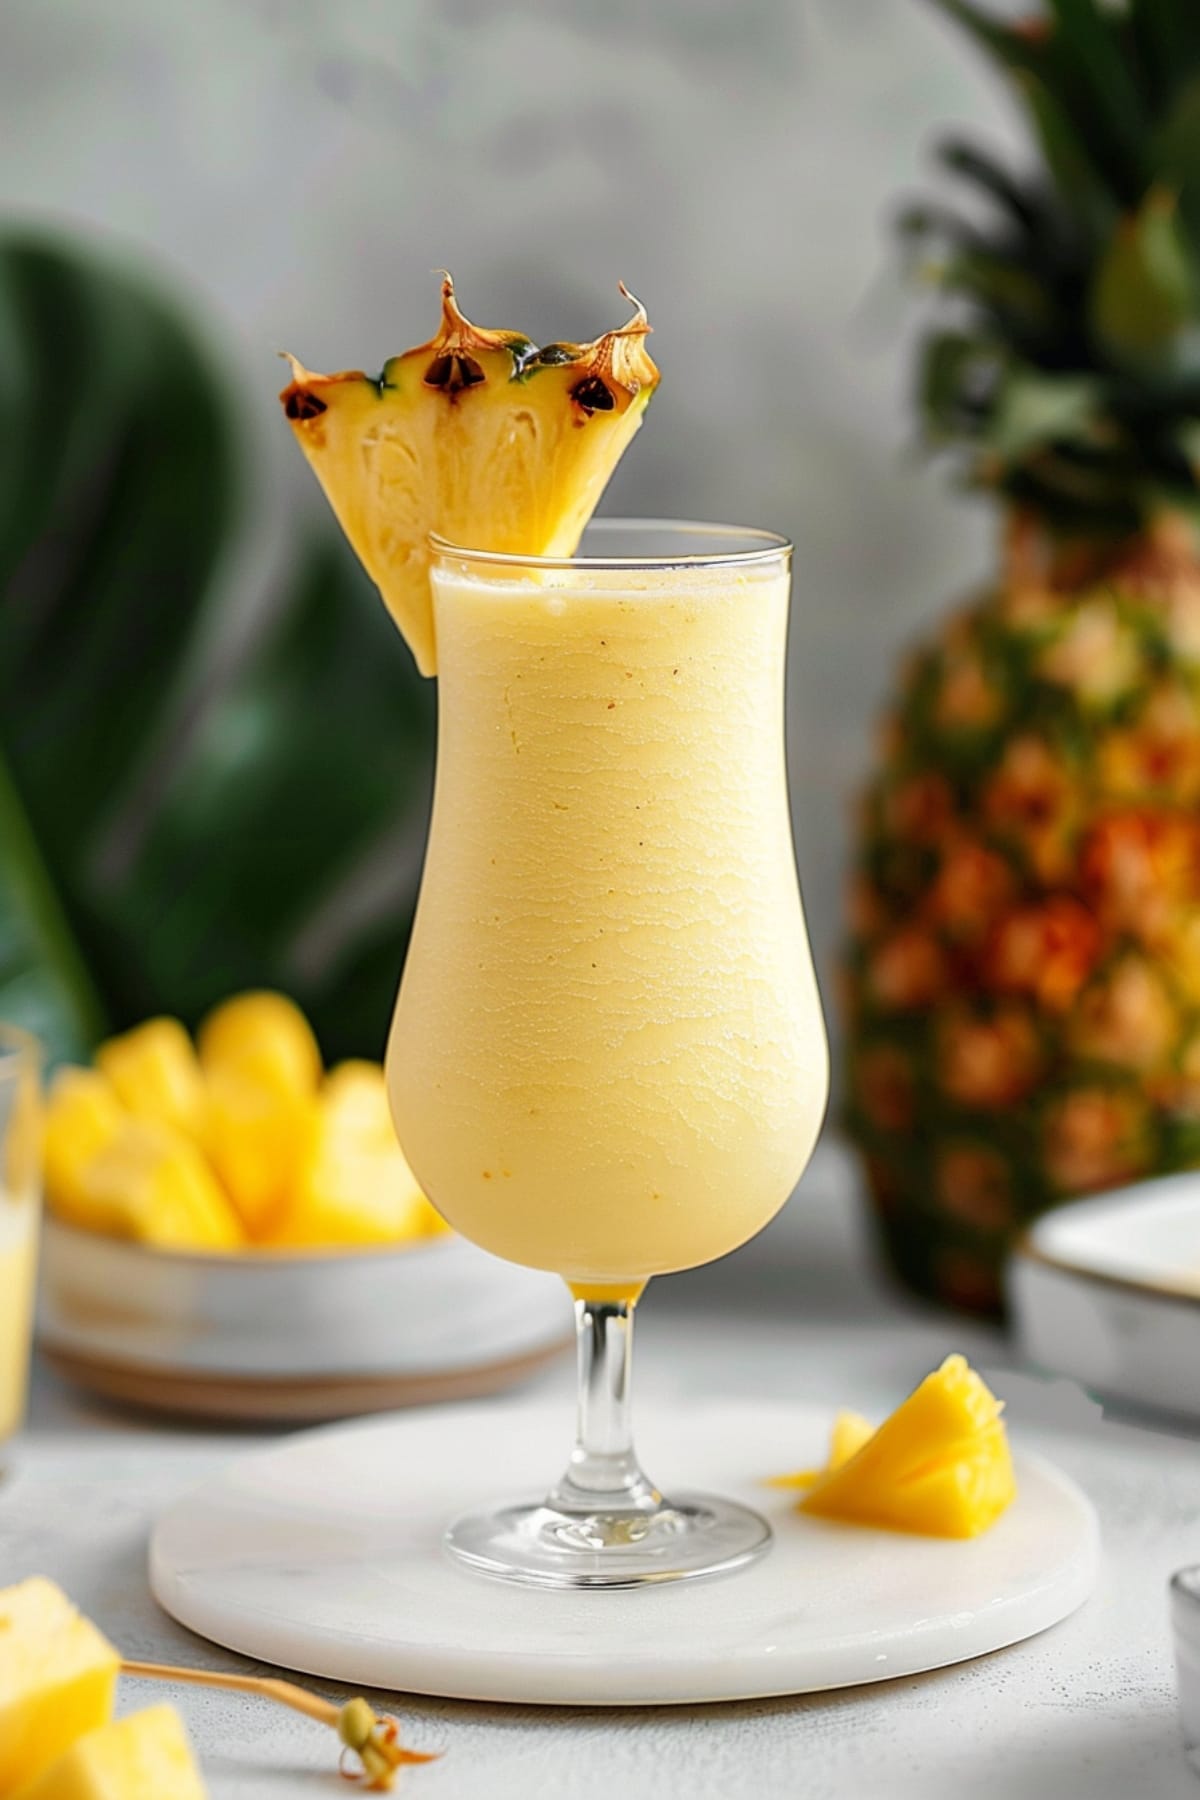 Homemade creamy pina colada with pineapple wedge in a glass